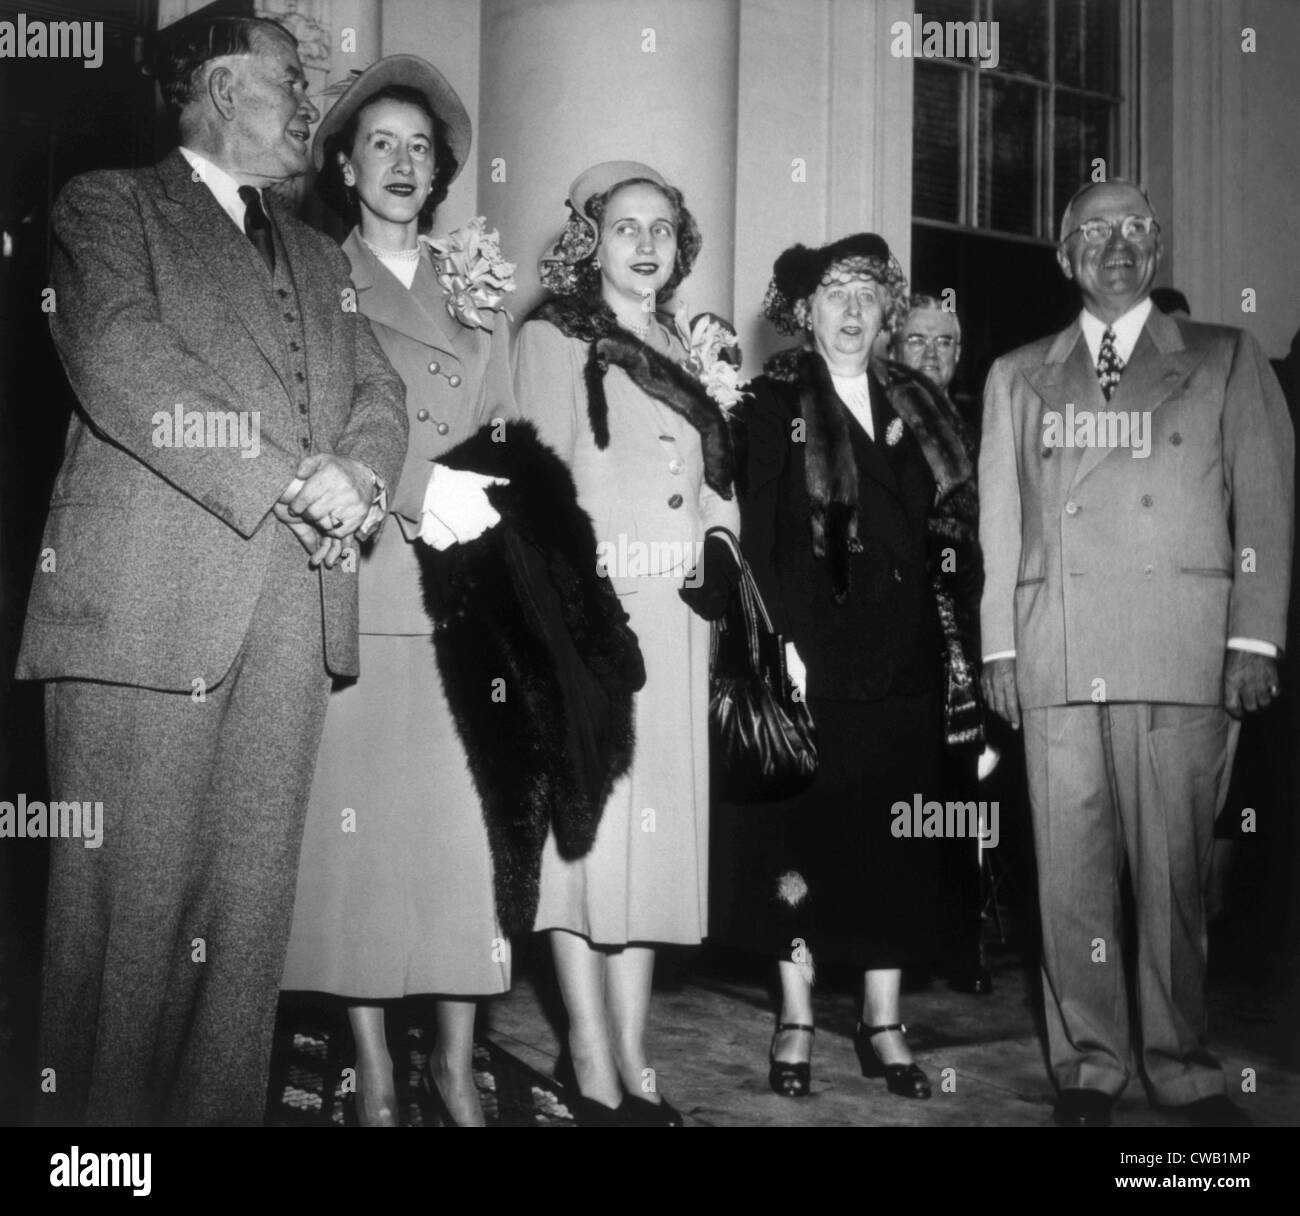 Vice-President elect Alben Barkley with his daughter, Margaret Truman, First Lady Bess Truman, President Harry Truman on the Stock Photo